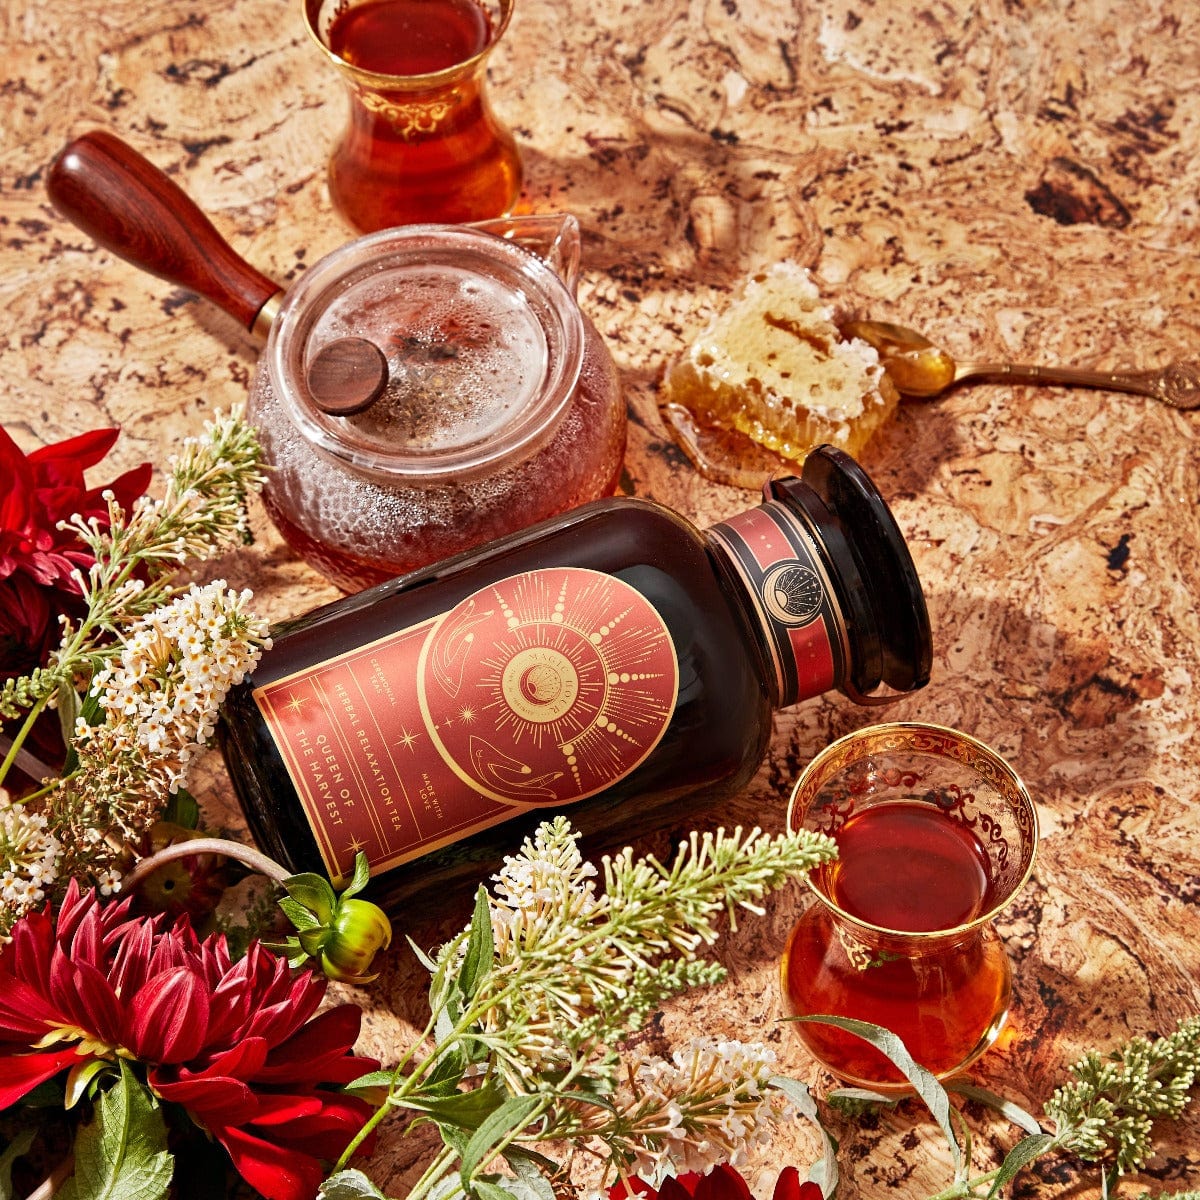 A box of Magic Hour&#39;s Queen of the Harvest: Herbal Relaxation Tea is surrounded by a glass teapot filled with organic tea, a honeycomb with a golden spoon, two traditional tea glasses brimming with loose leaf tea, red and white flowers, and greenery on a speckled countertop. The scene exudes a cozy and inviting atmosphere.